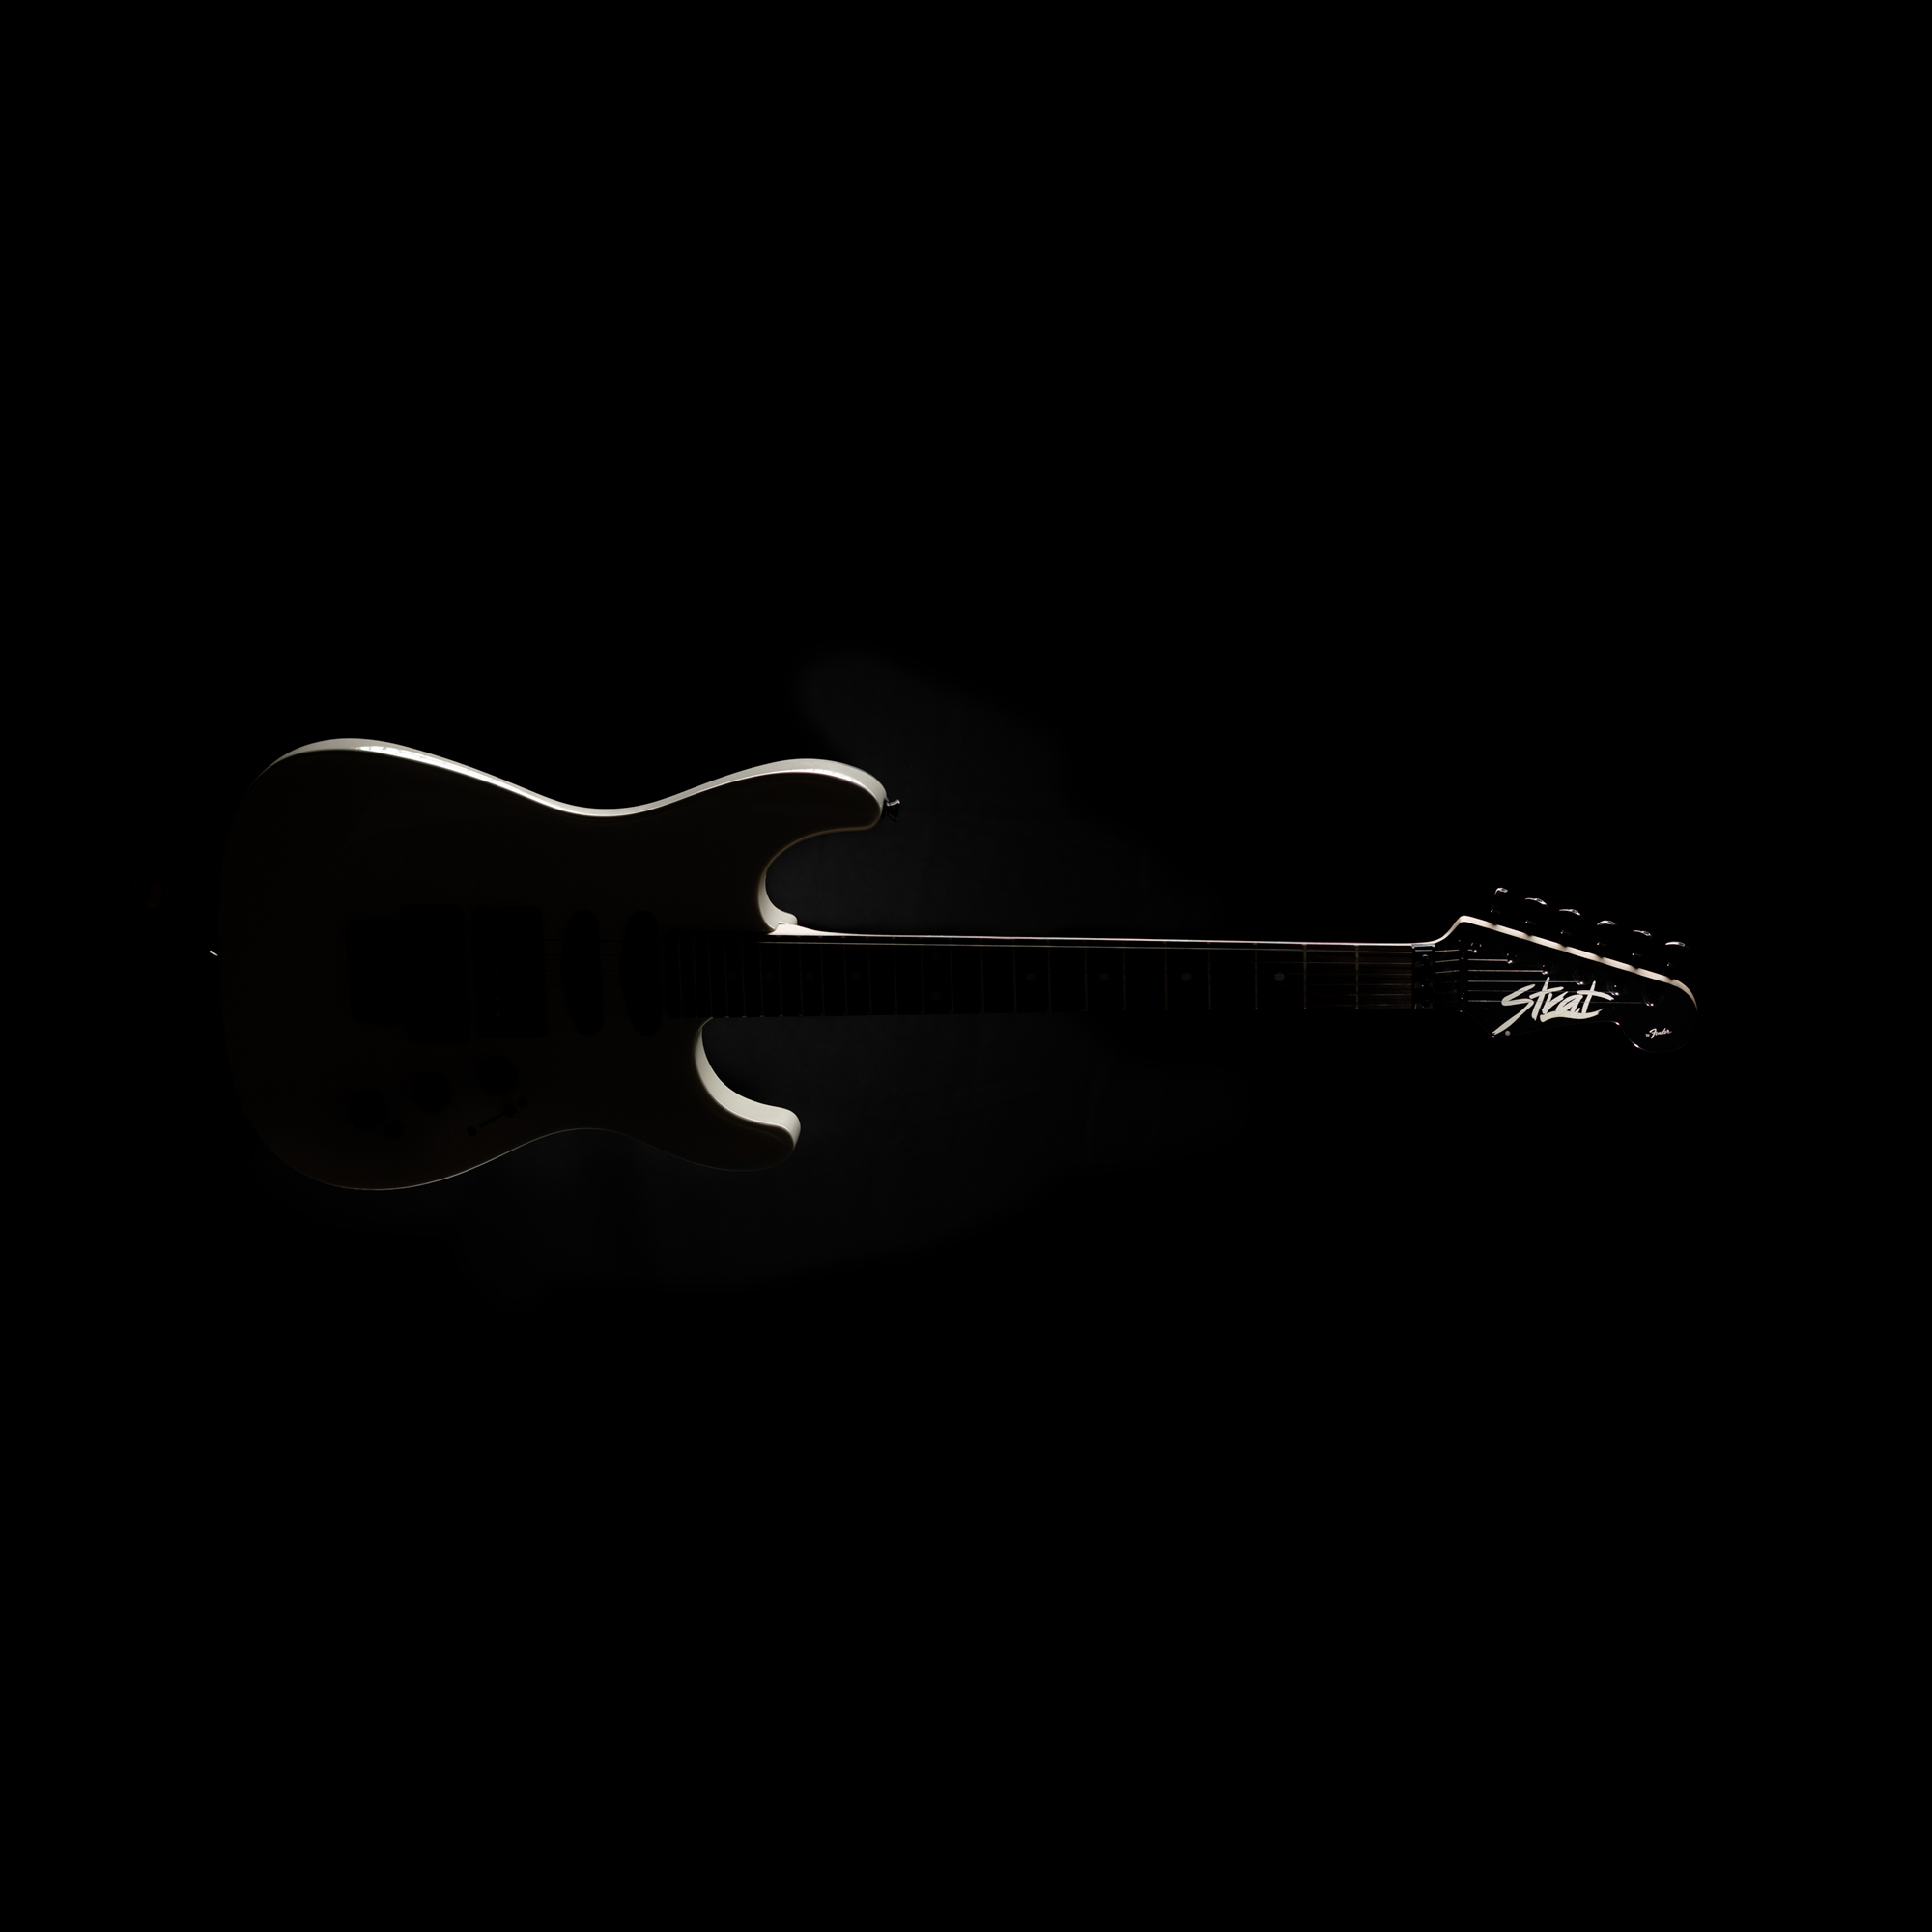 Product photography of Fender HM Strat silhouette illuminated by rim lighting.